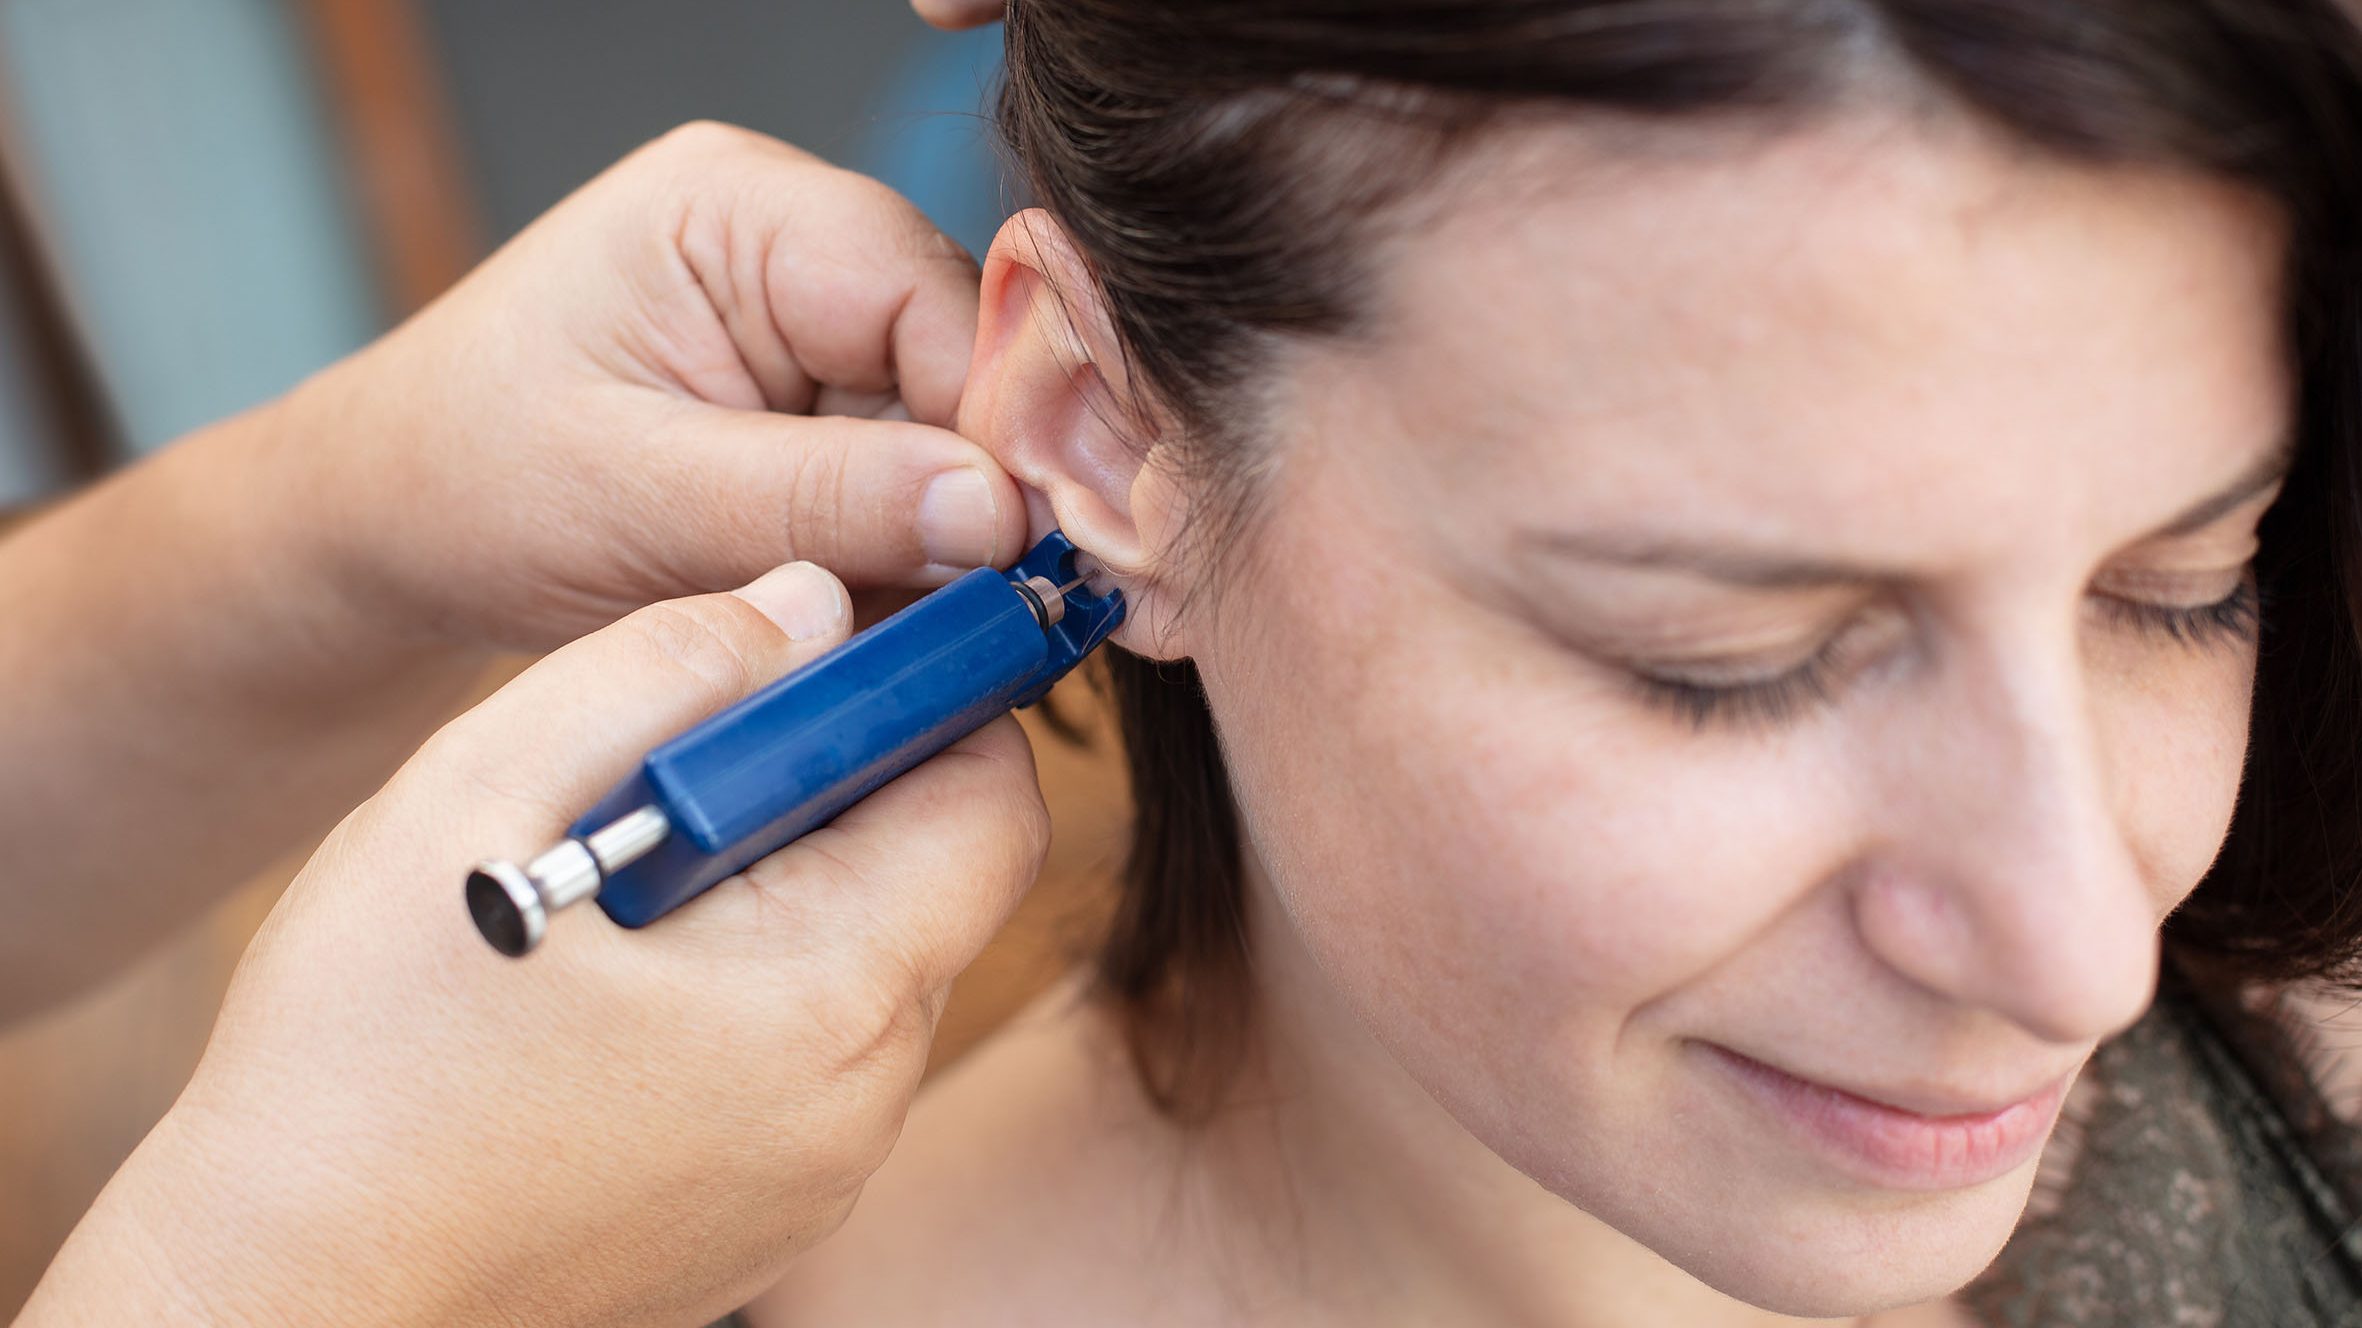 Woman having ear piercing process with special piercing gun in beauty center by medical worker, cropped close up view